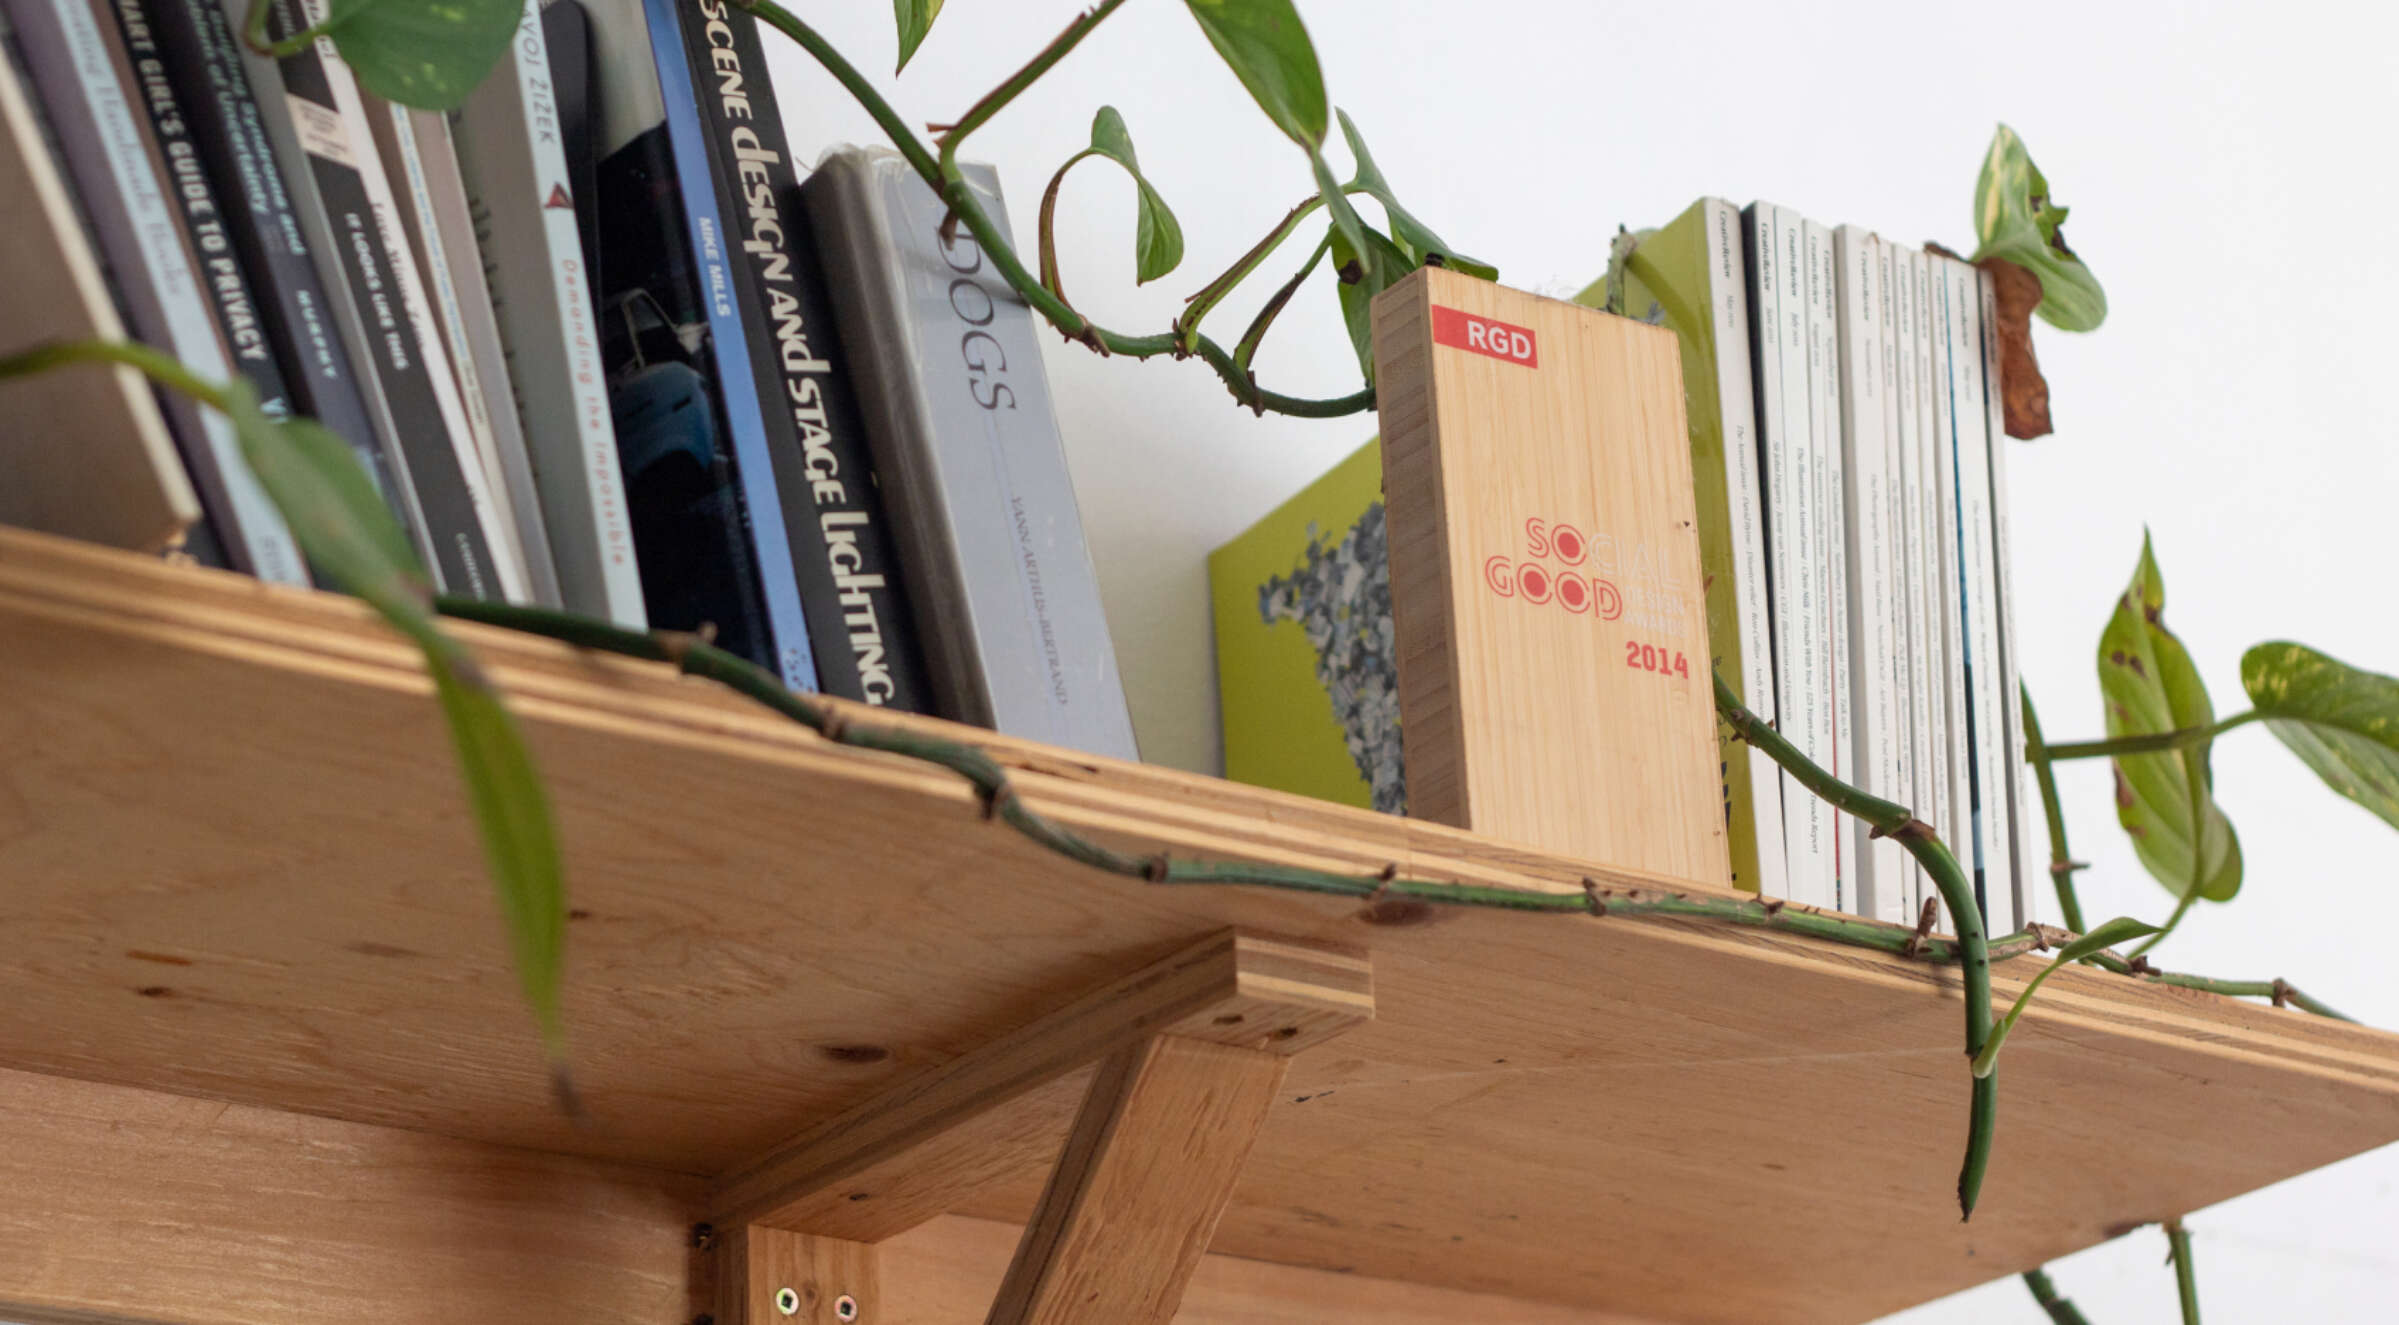 A wooden shelf is filled with various books and magazines, with a leafy green plant winding around the items. One prominent book is titled "So Good" and dated 2014. The shelf is supported by sturdy brackets attached to a white wall.